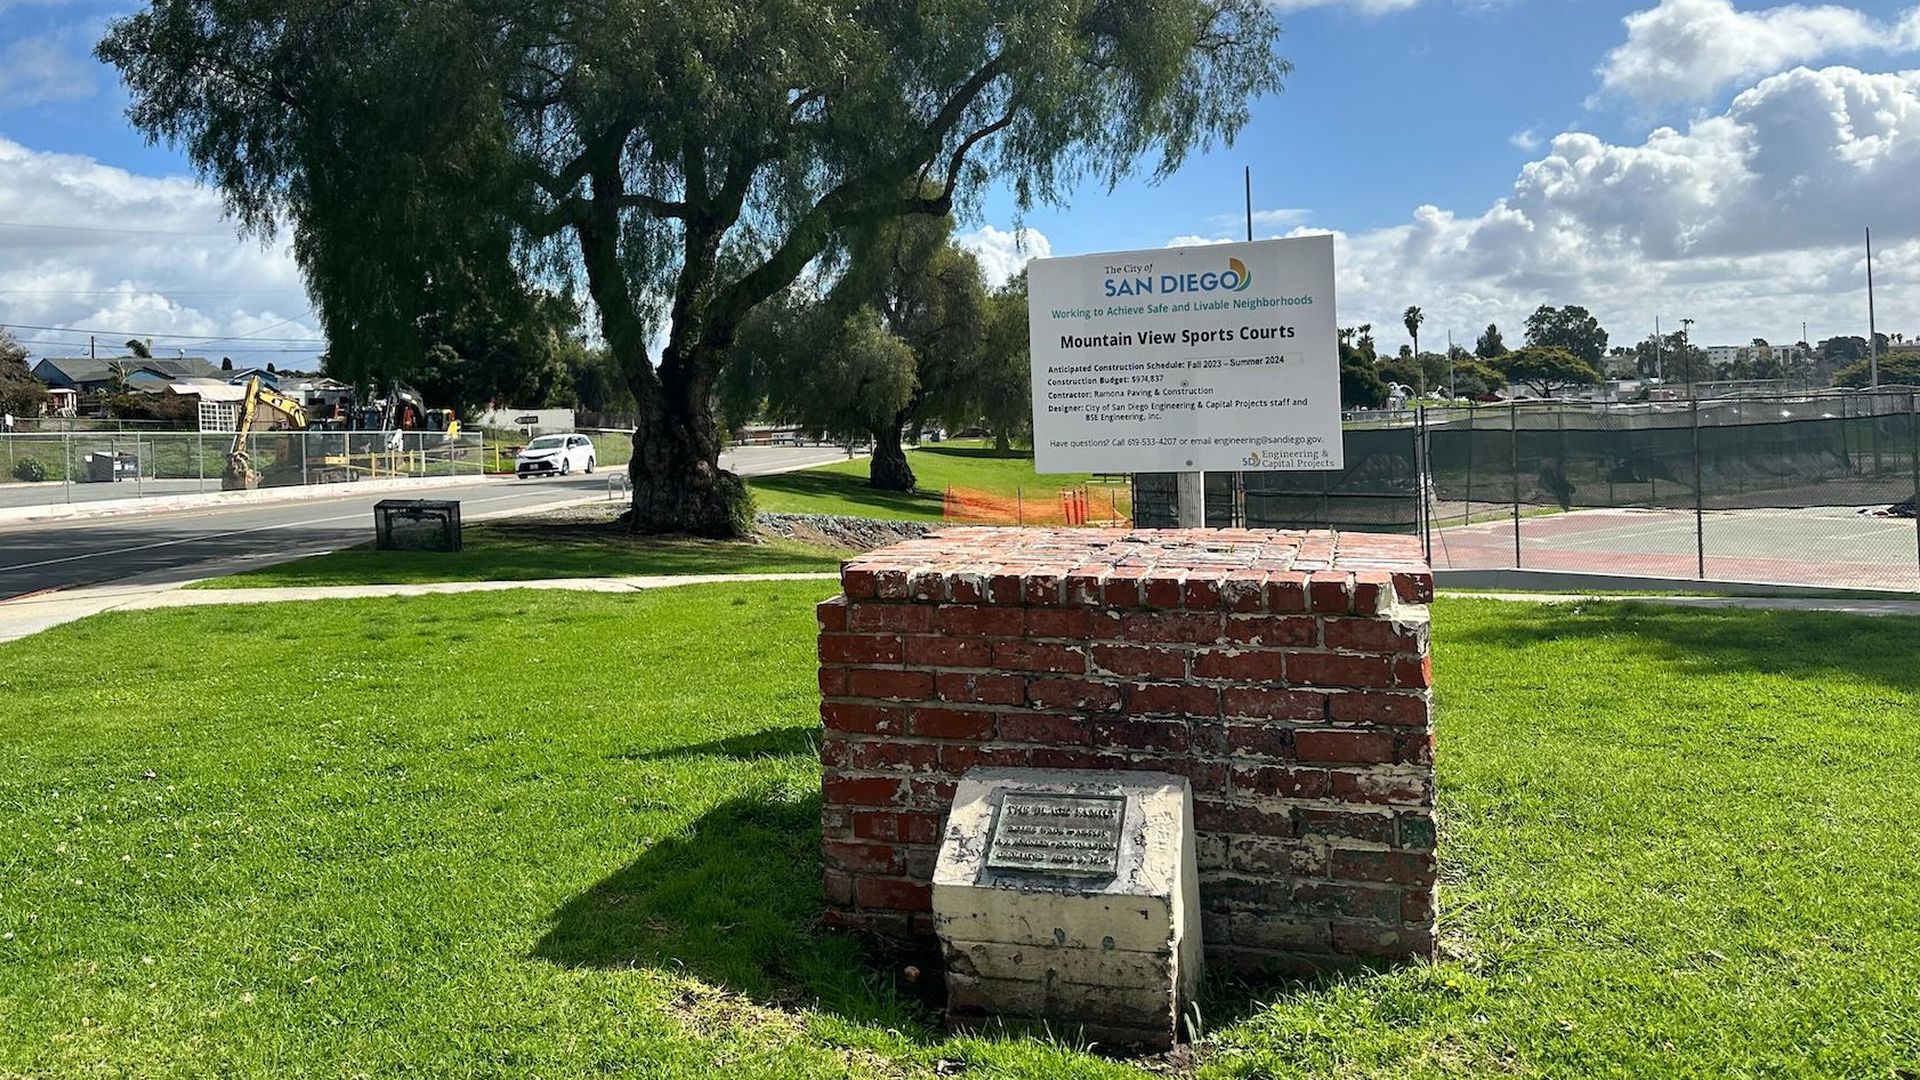 A brick base with a plaque where a statue once stood at a grassy park.